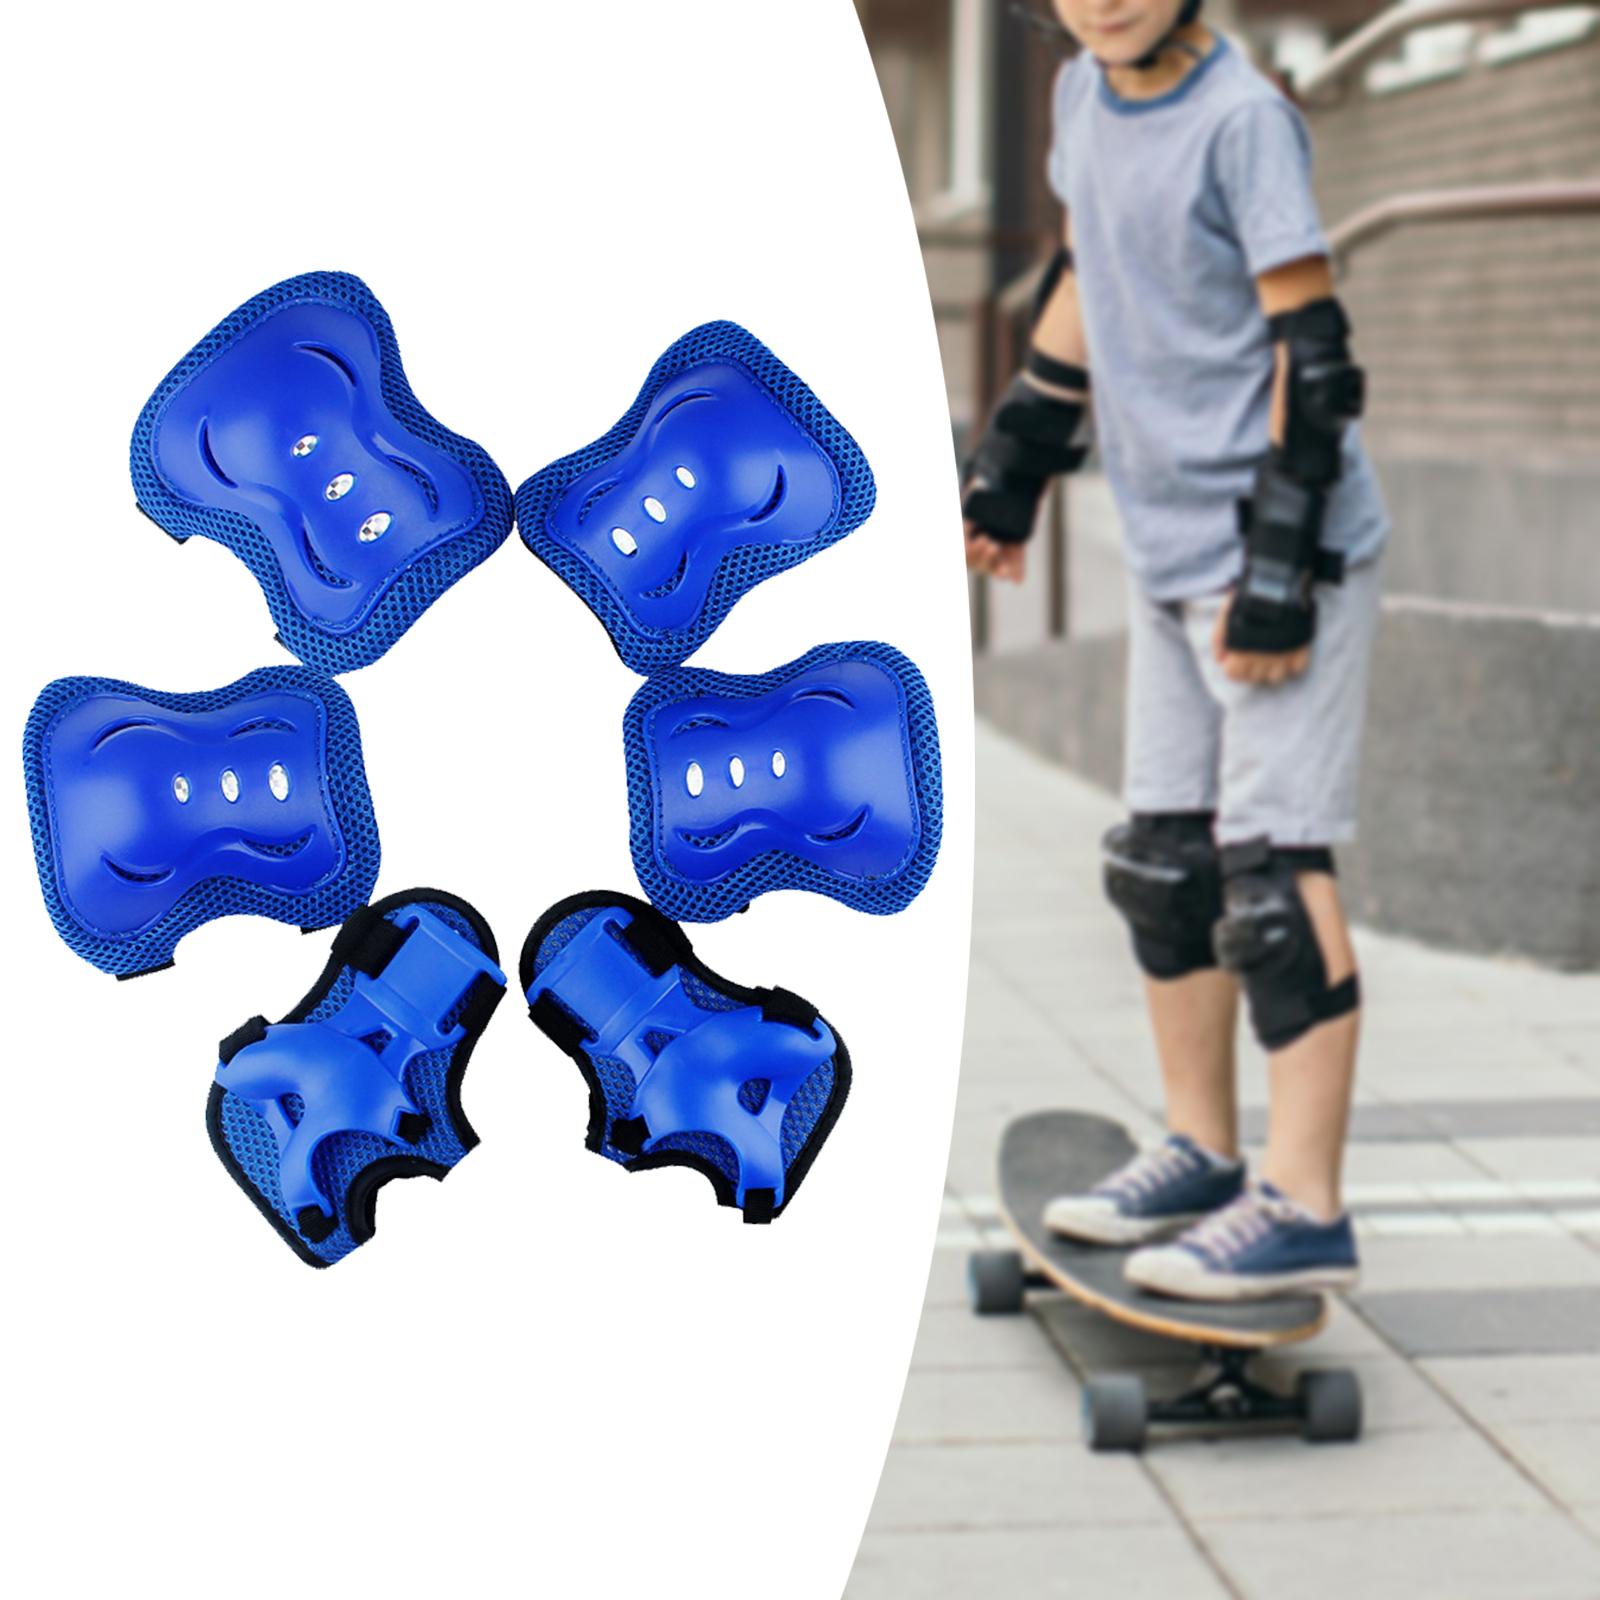 Knee Pads Elbow Pads Wrist Guards Protection Riding Kids Protective Gear Set Deep Blue M